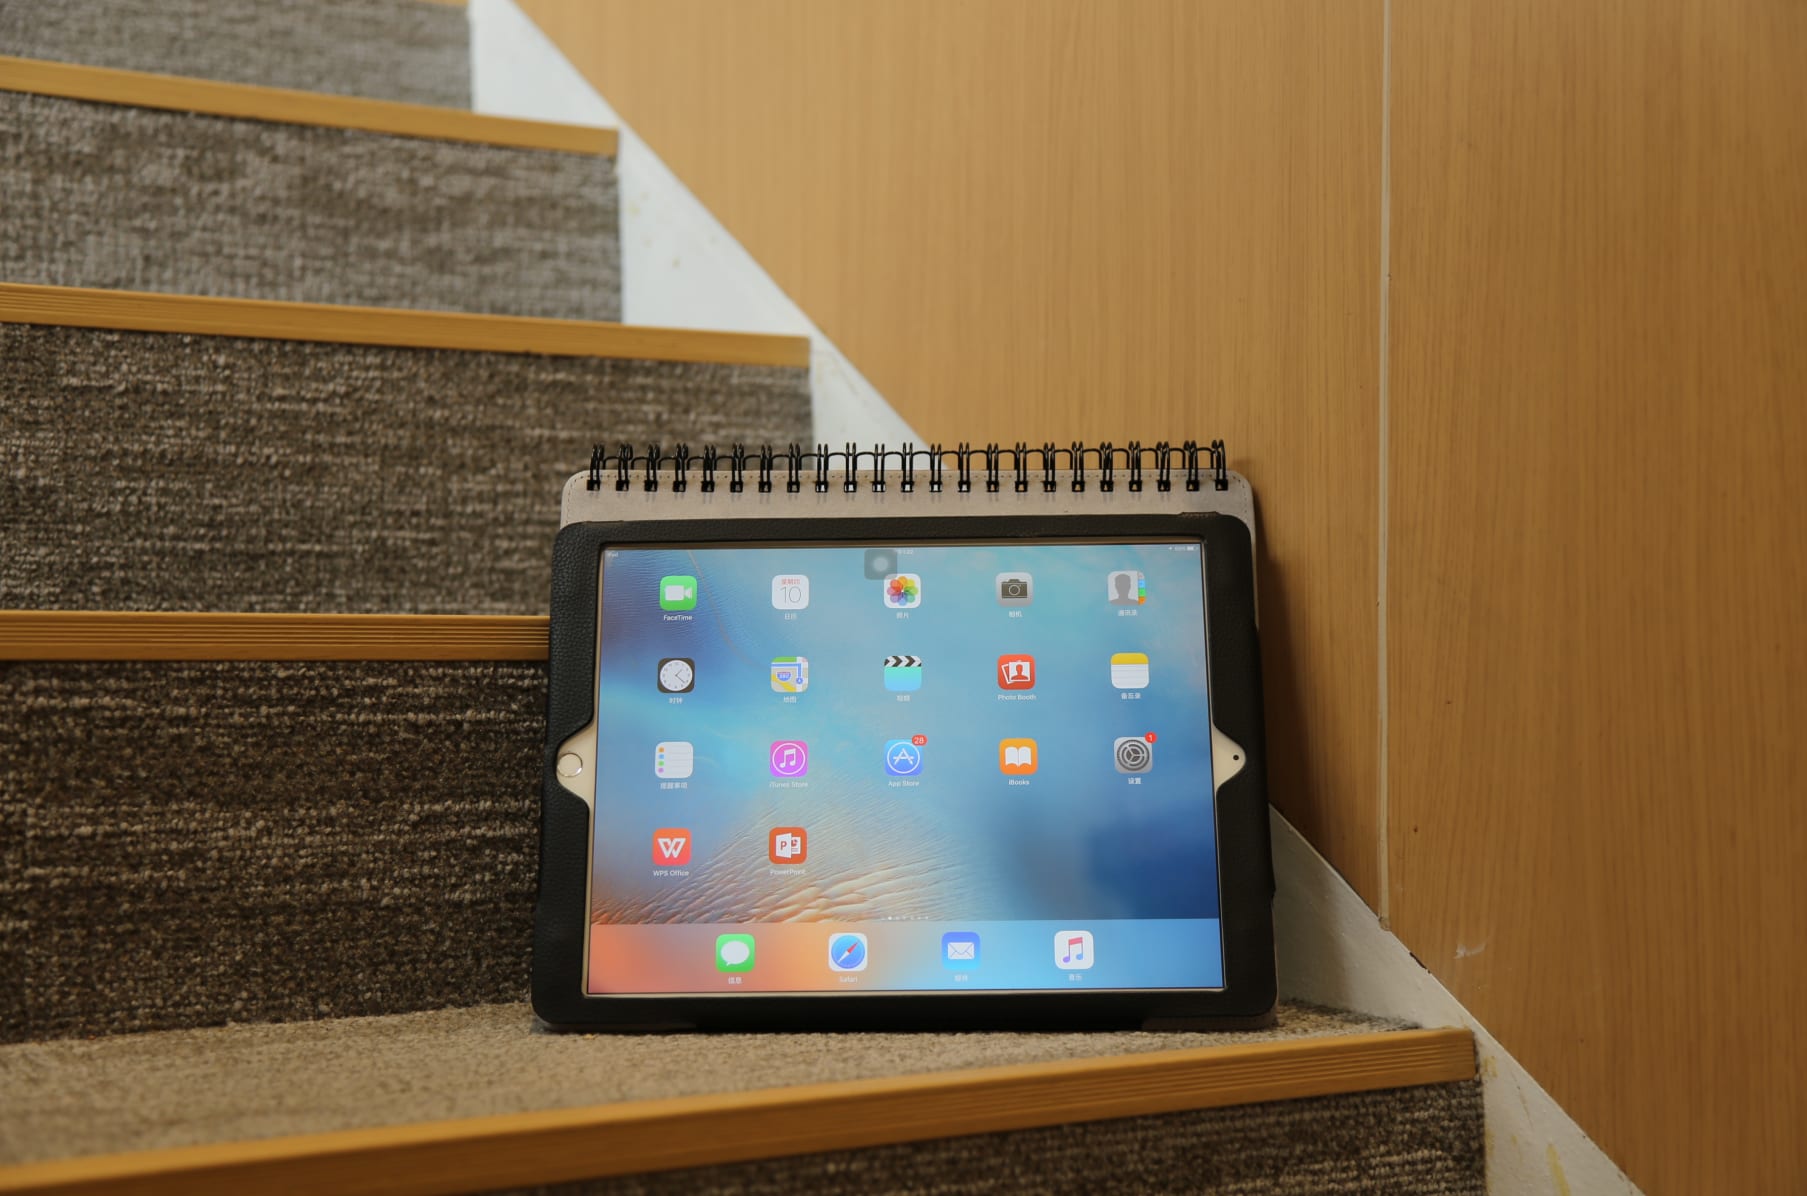 The iPad Pro Receives a Wire-bound Sketchbook From Longo Case